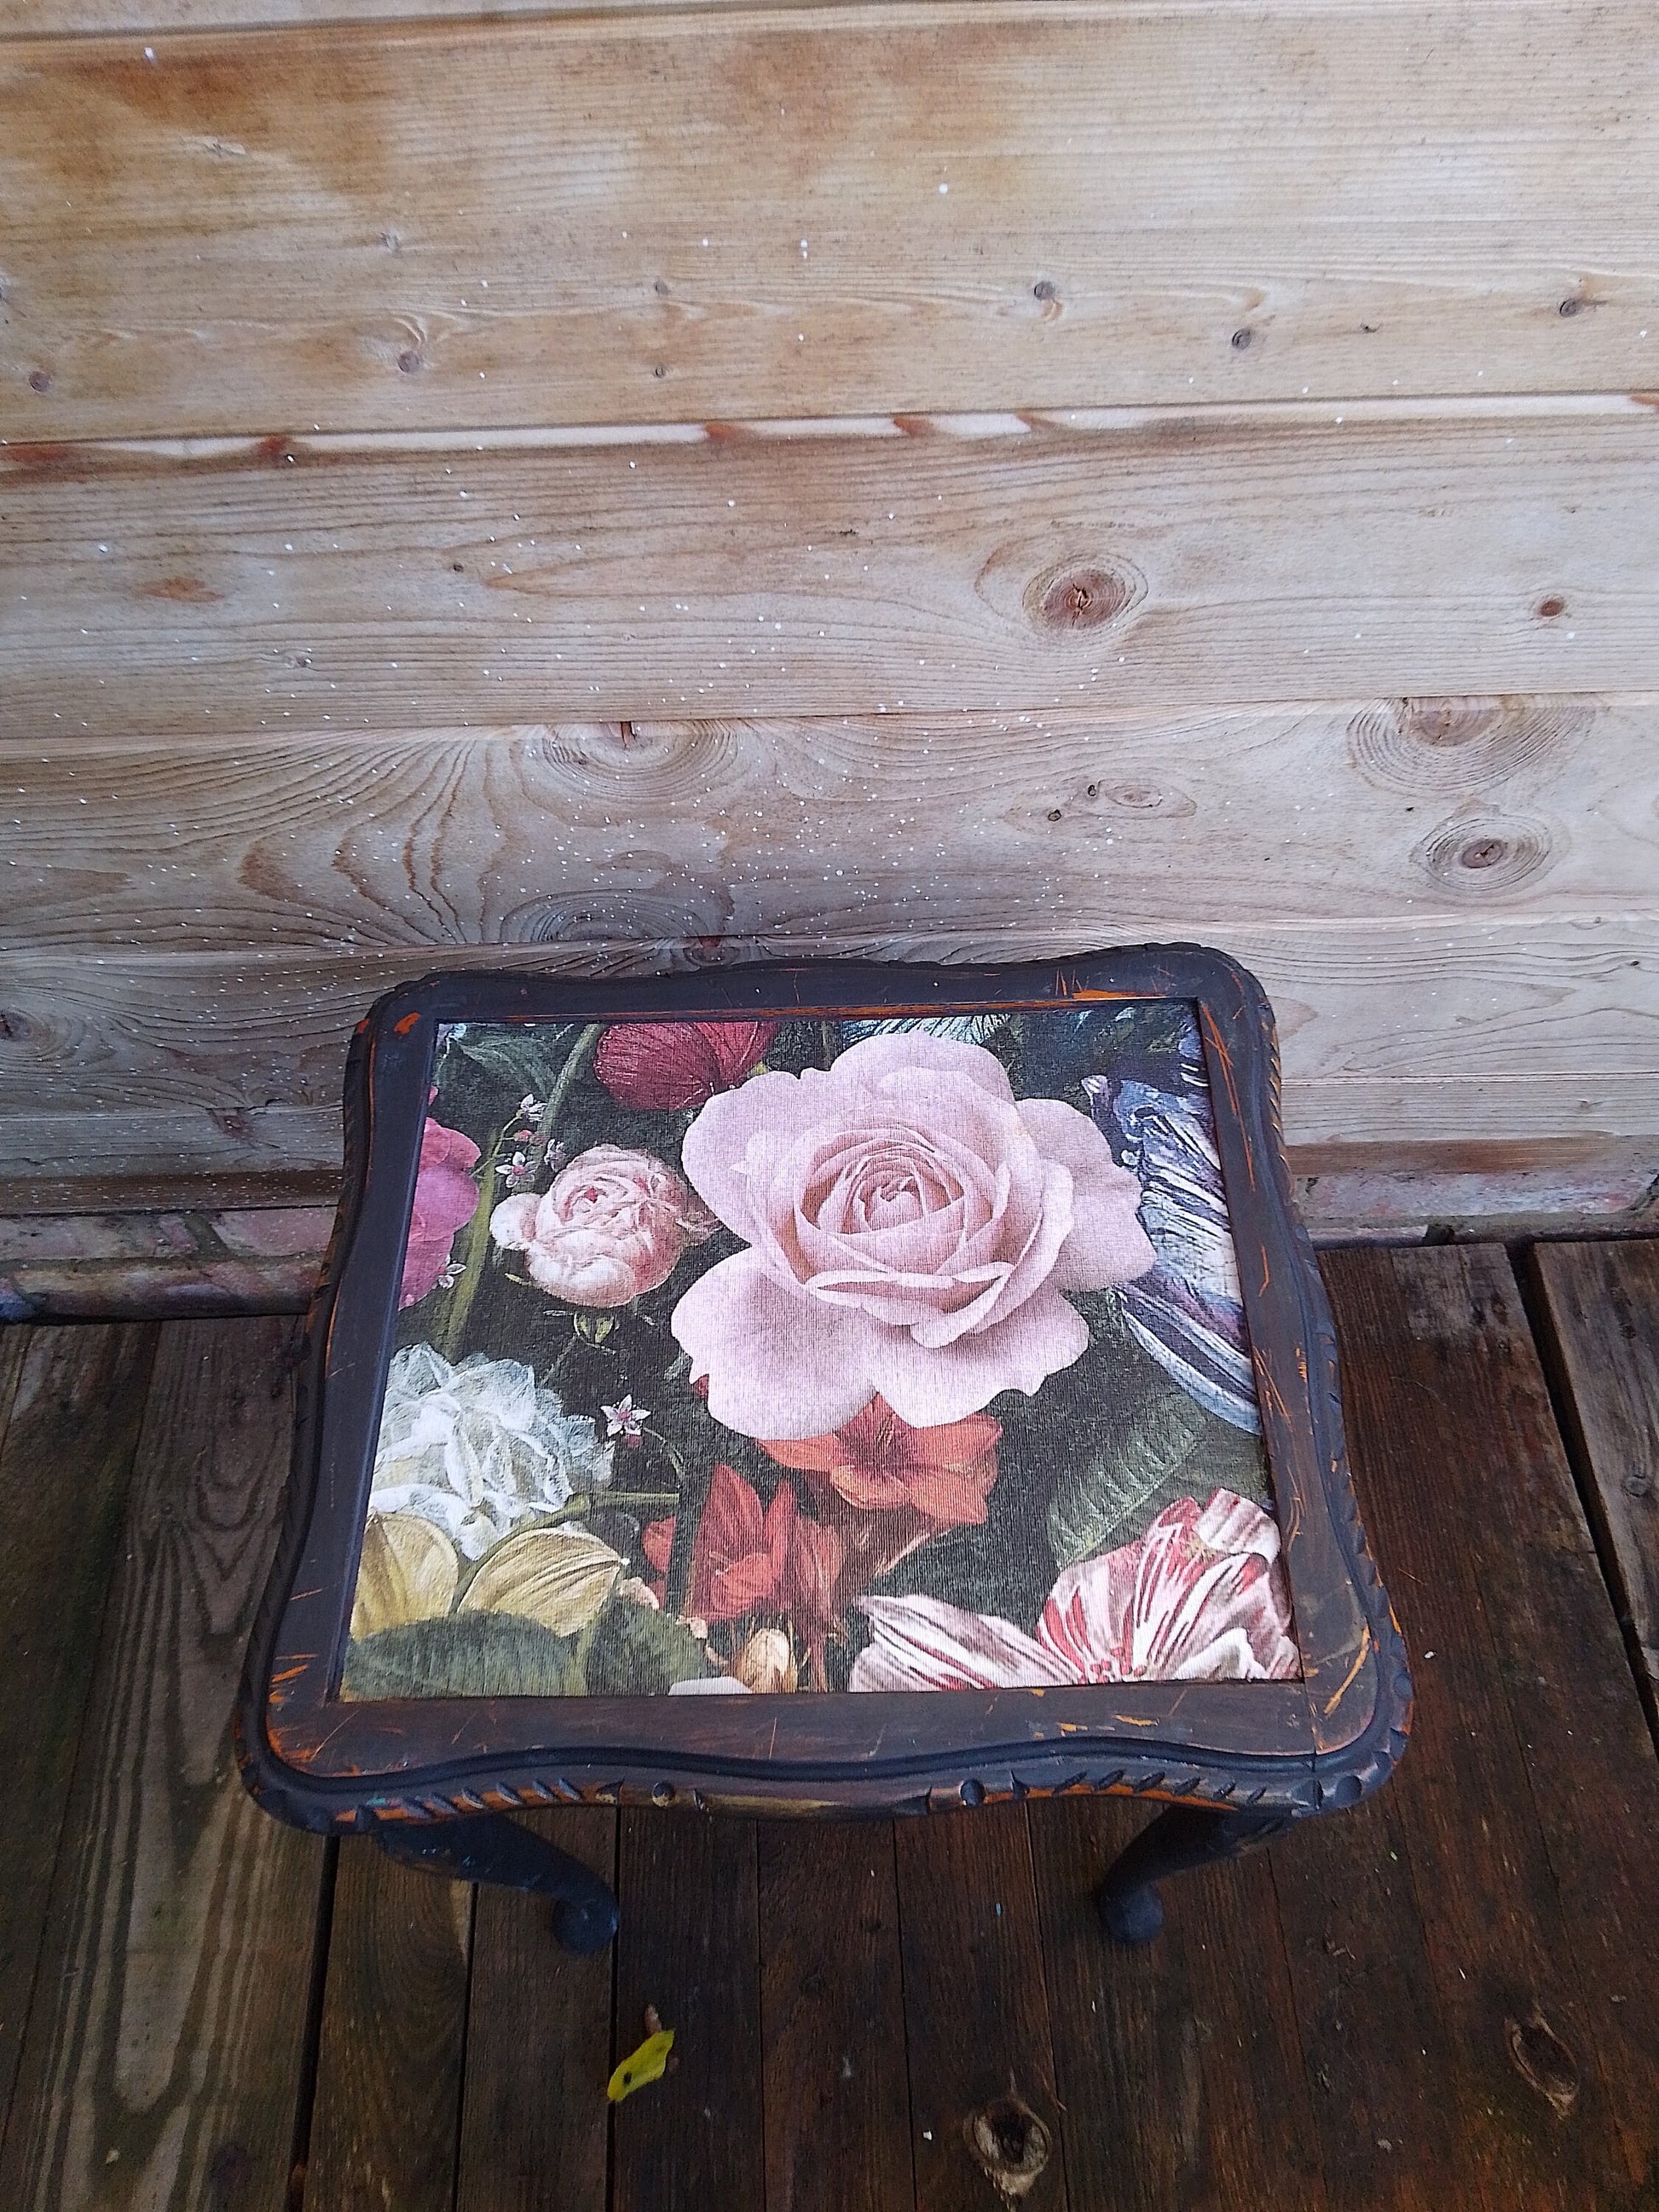 Small Nightshade side table